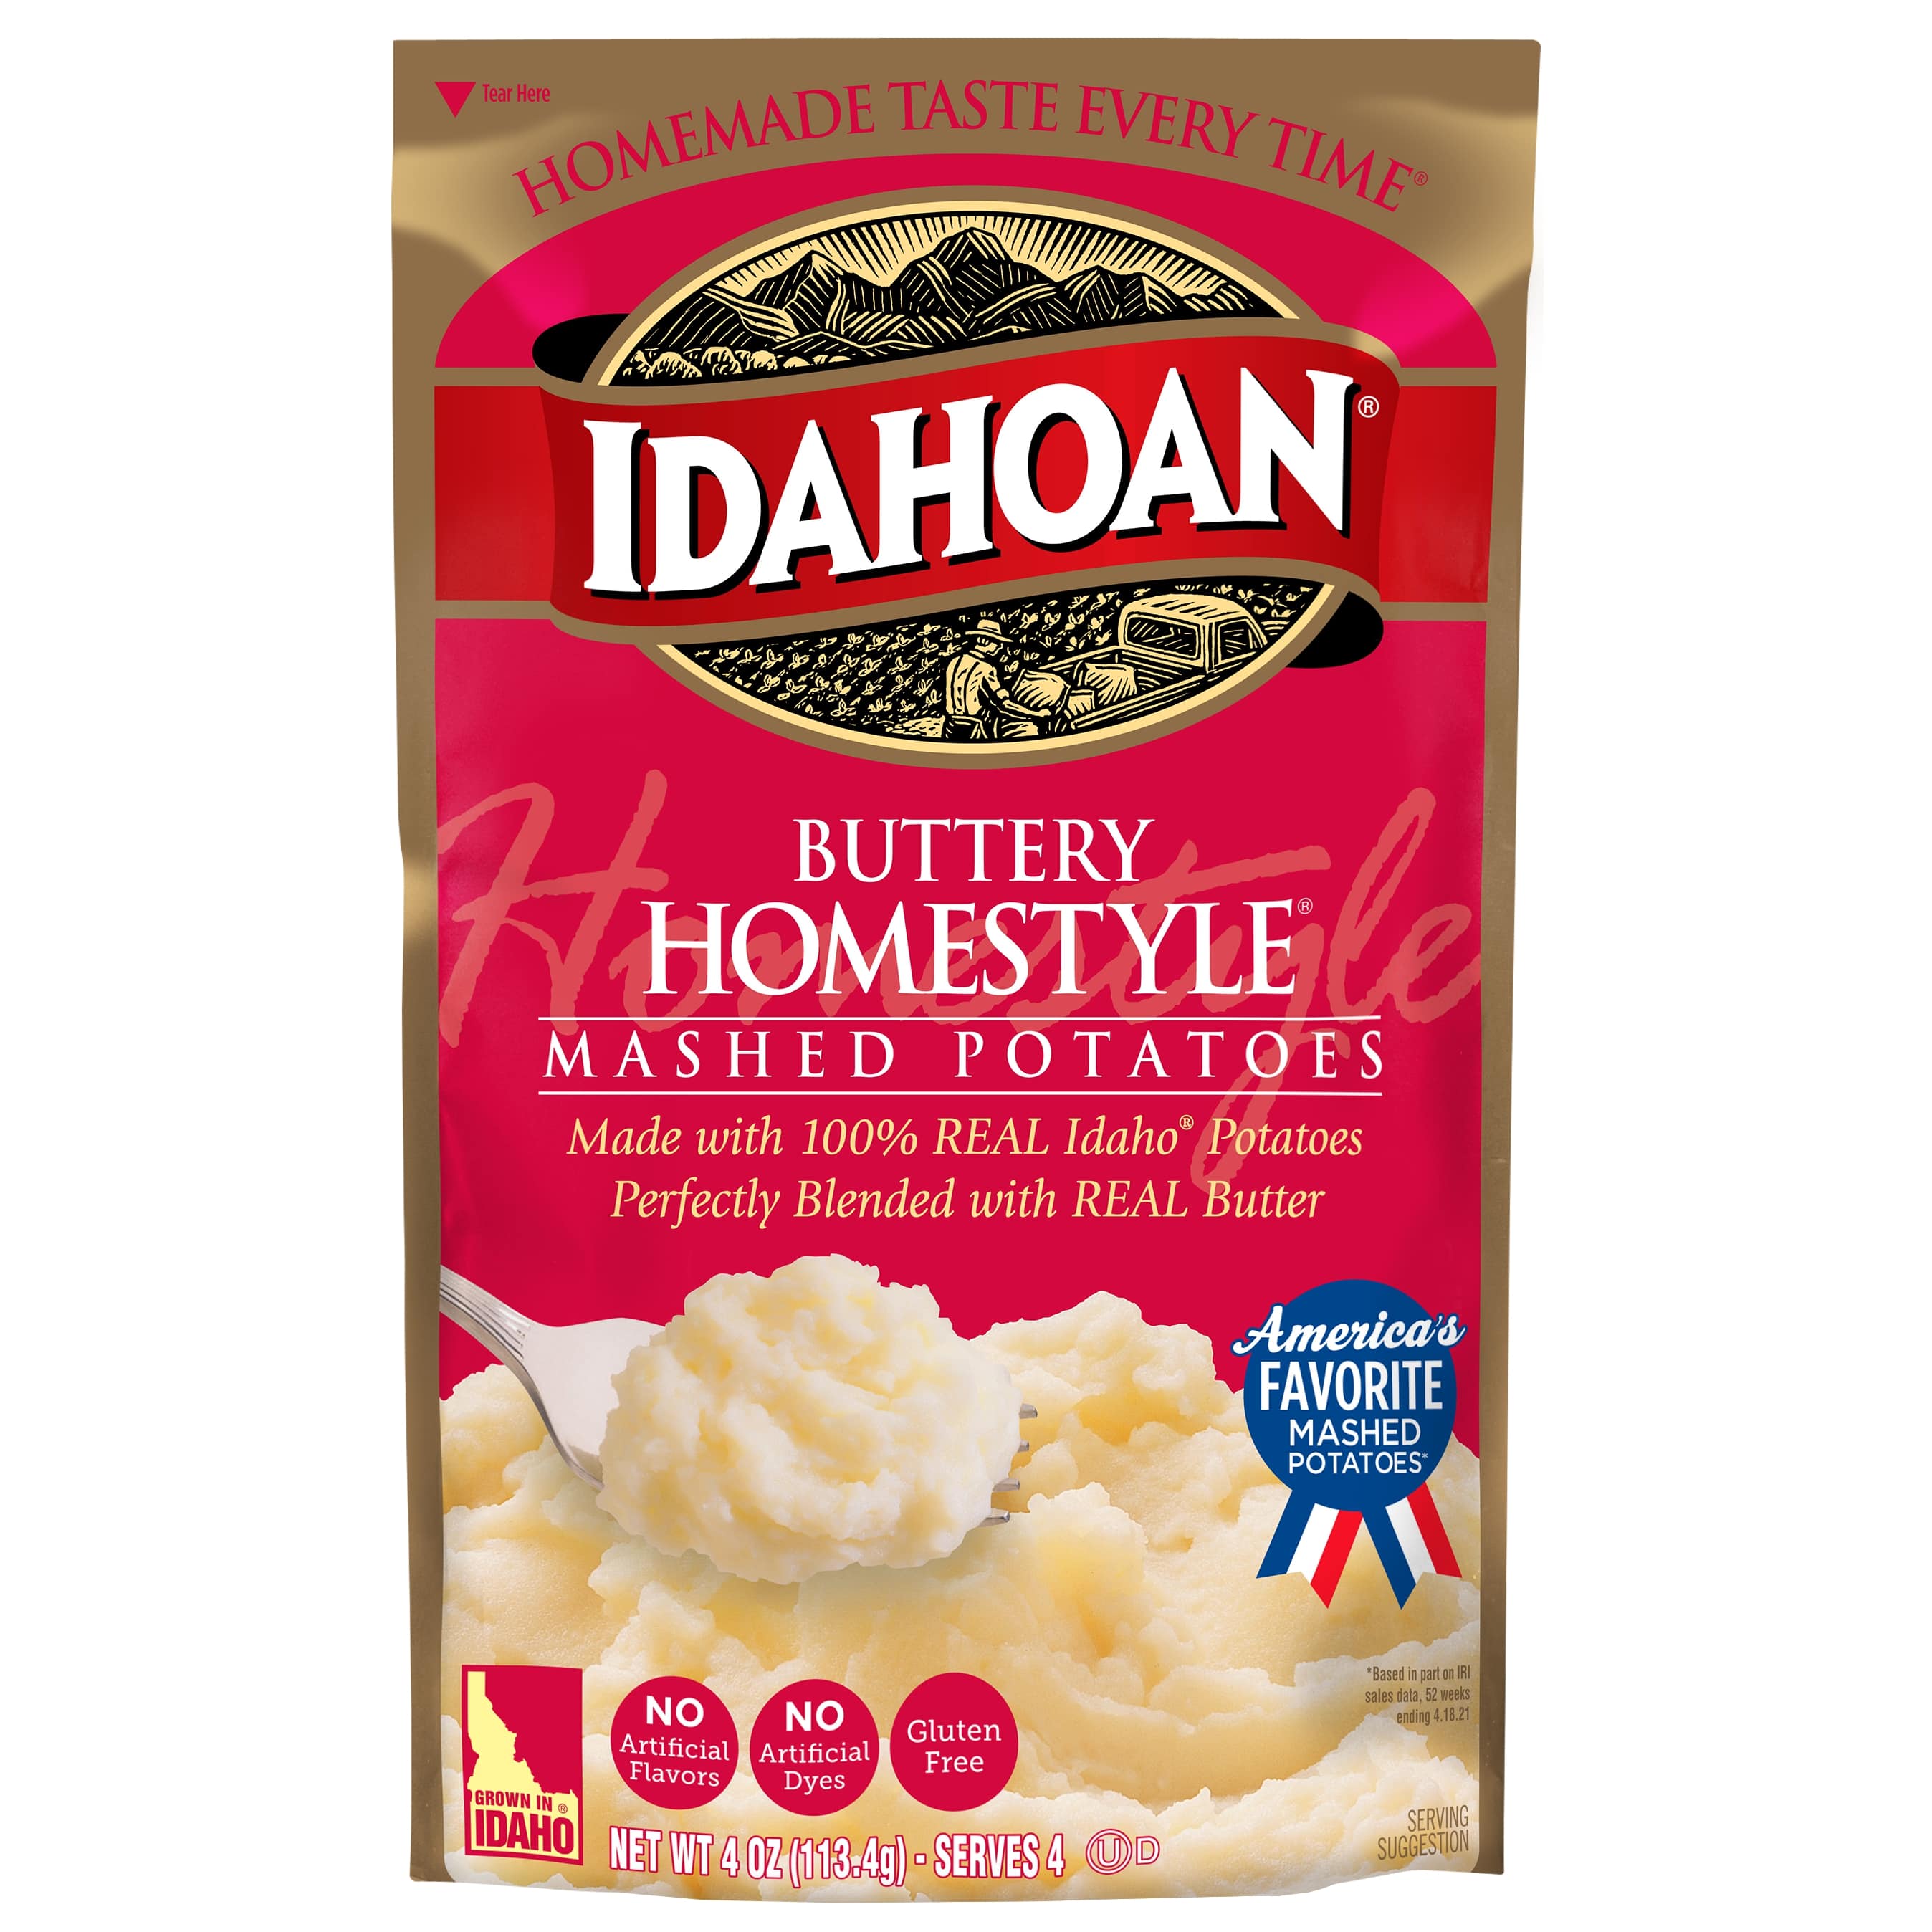 Idahoan Buttery Homestyle Mashed Potatoes, 4 Ounce Pouch -- 12 per case.